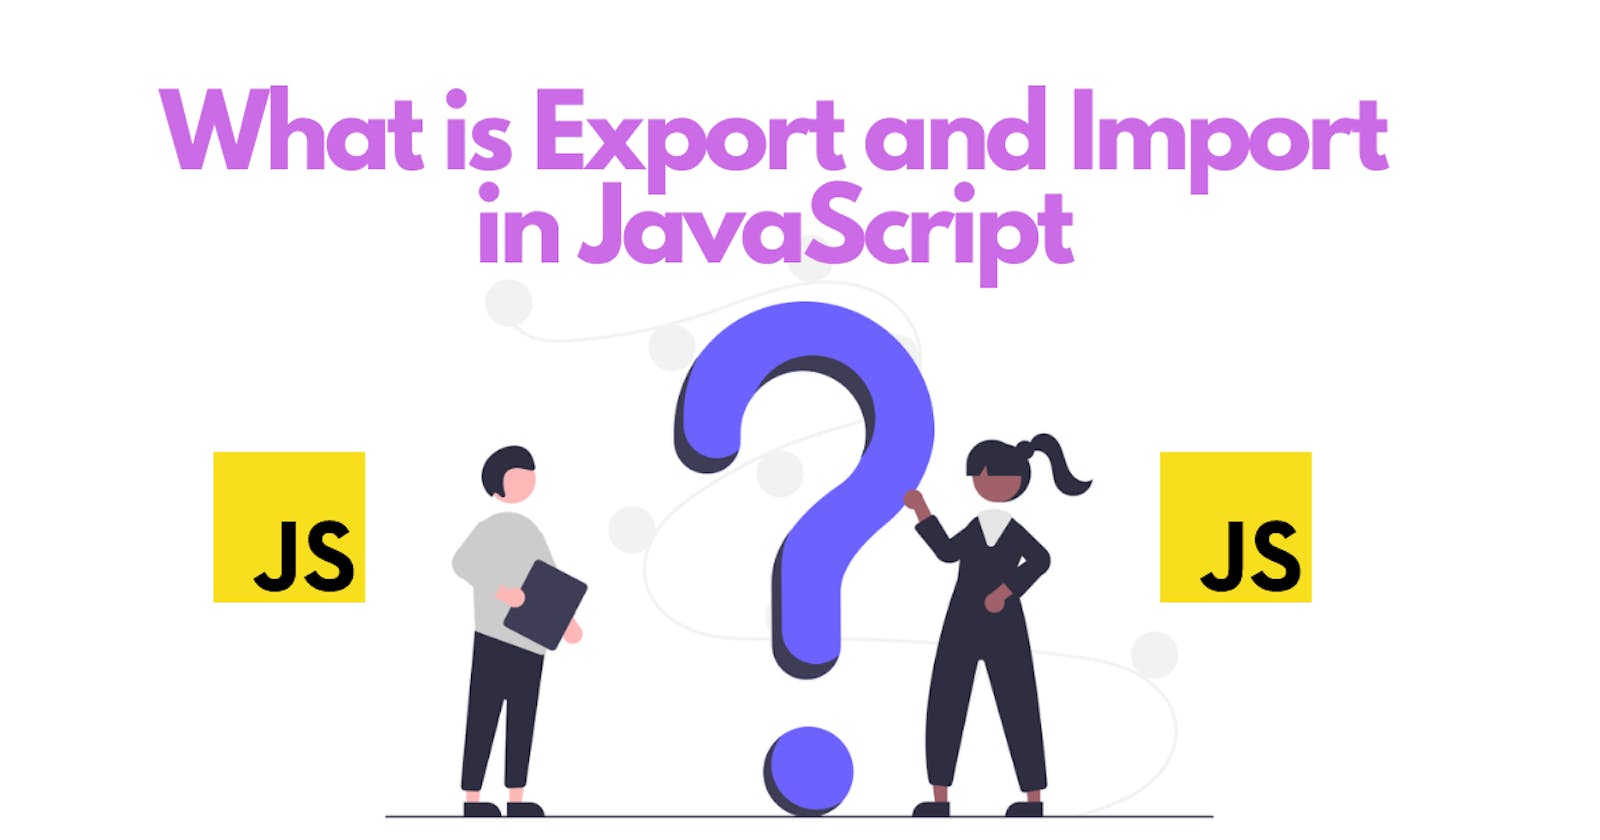 What is Export and Import in JavaScript?